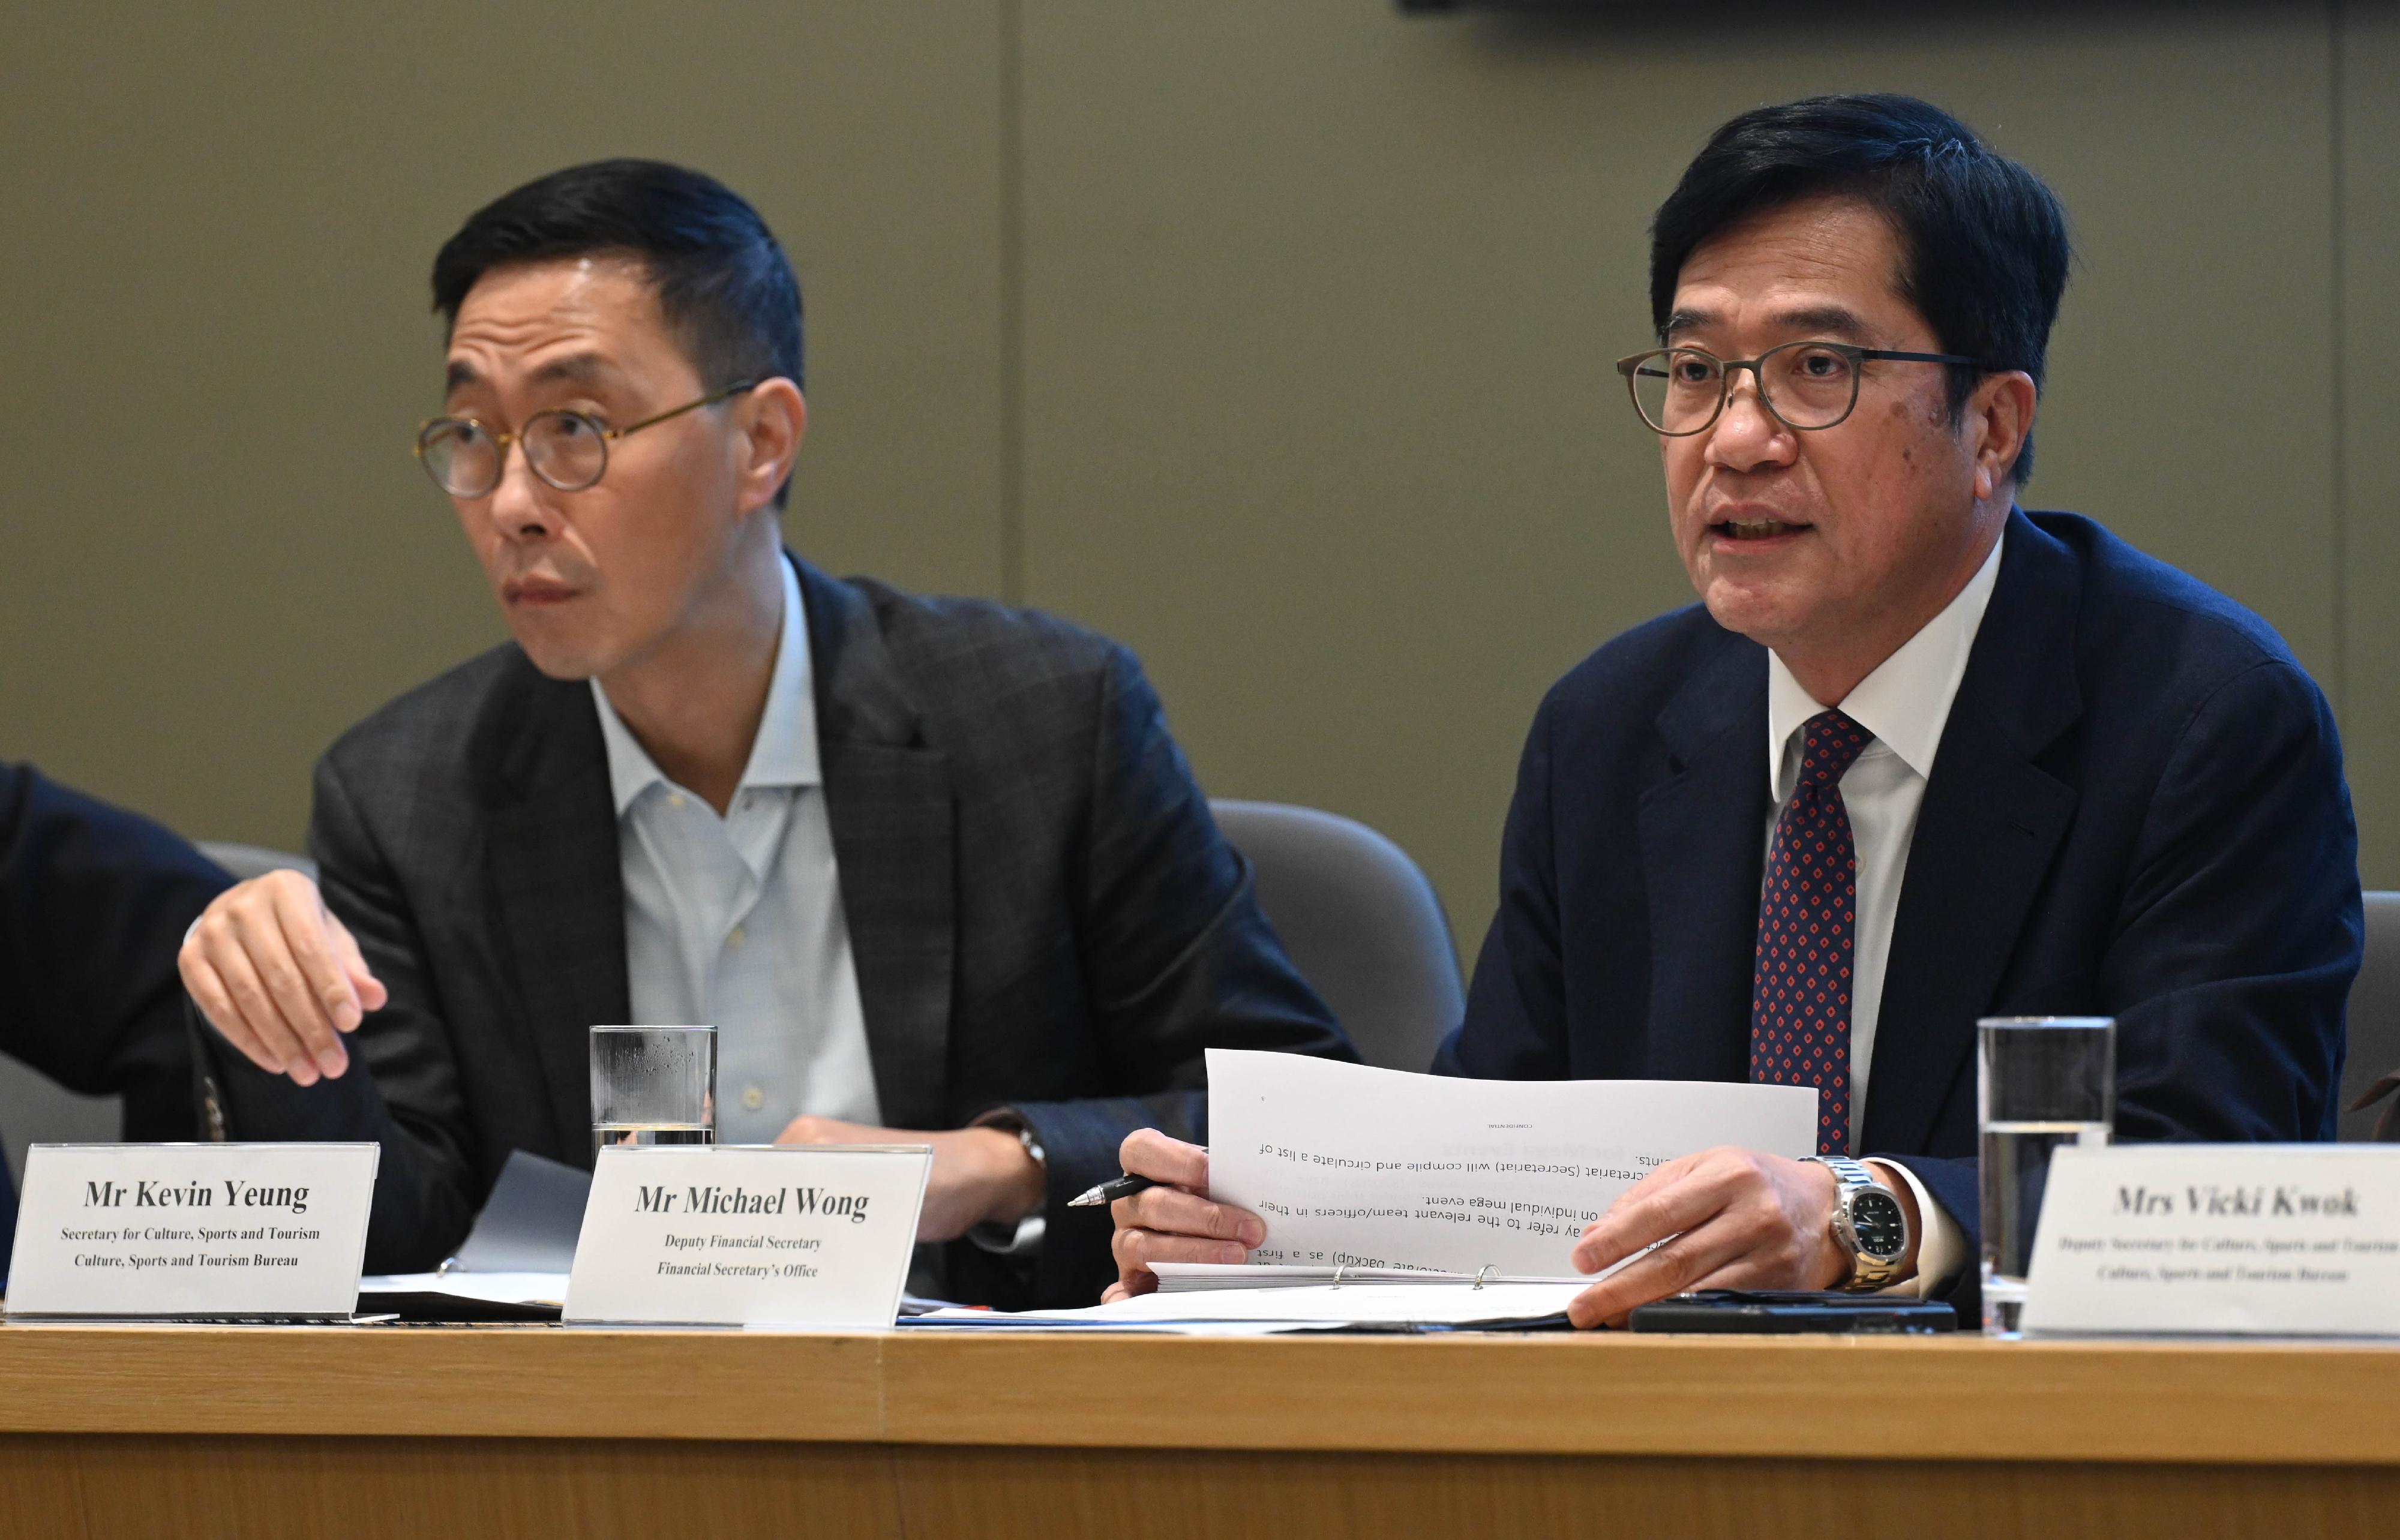 The Mega Events Coordination Group chaired by the Deputy Financial Secretary, Mr Michael Wong, convened a meeting today (March 8). Photo shows Mr Wong (right), and the Secretary for Culture, Sports and Tourism, Mr Kevin Yeung (left), having discussion with various representatives about strengthening coordination of major events. 